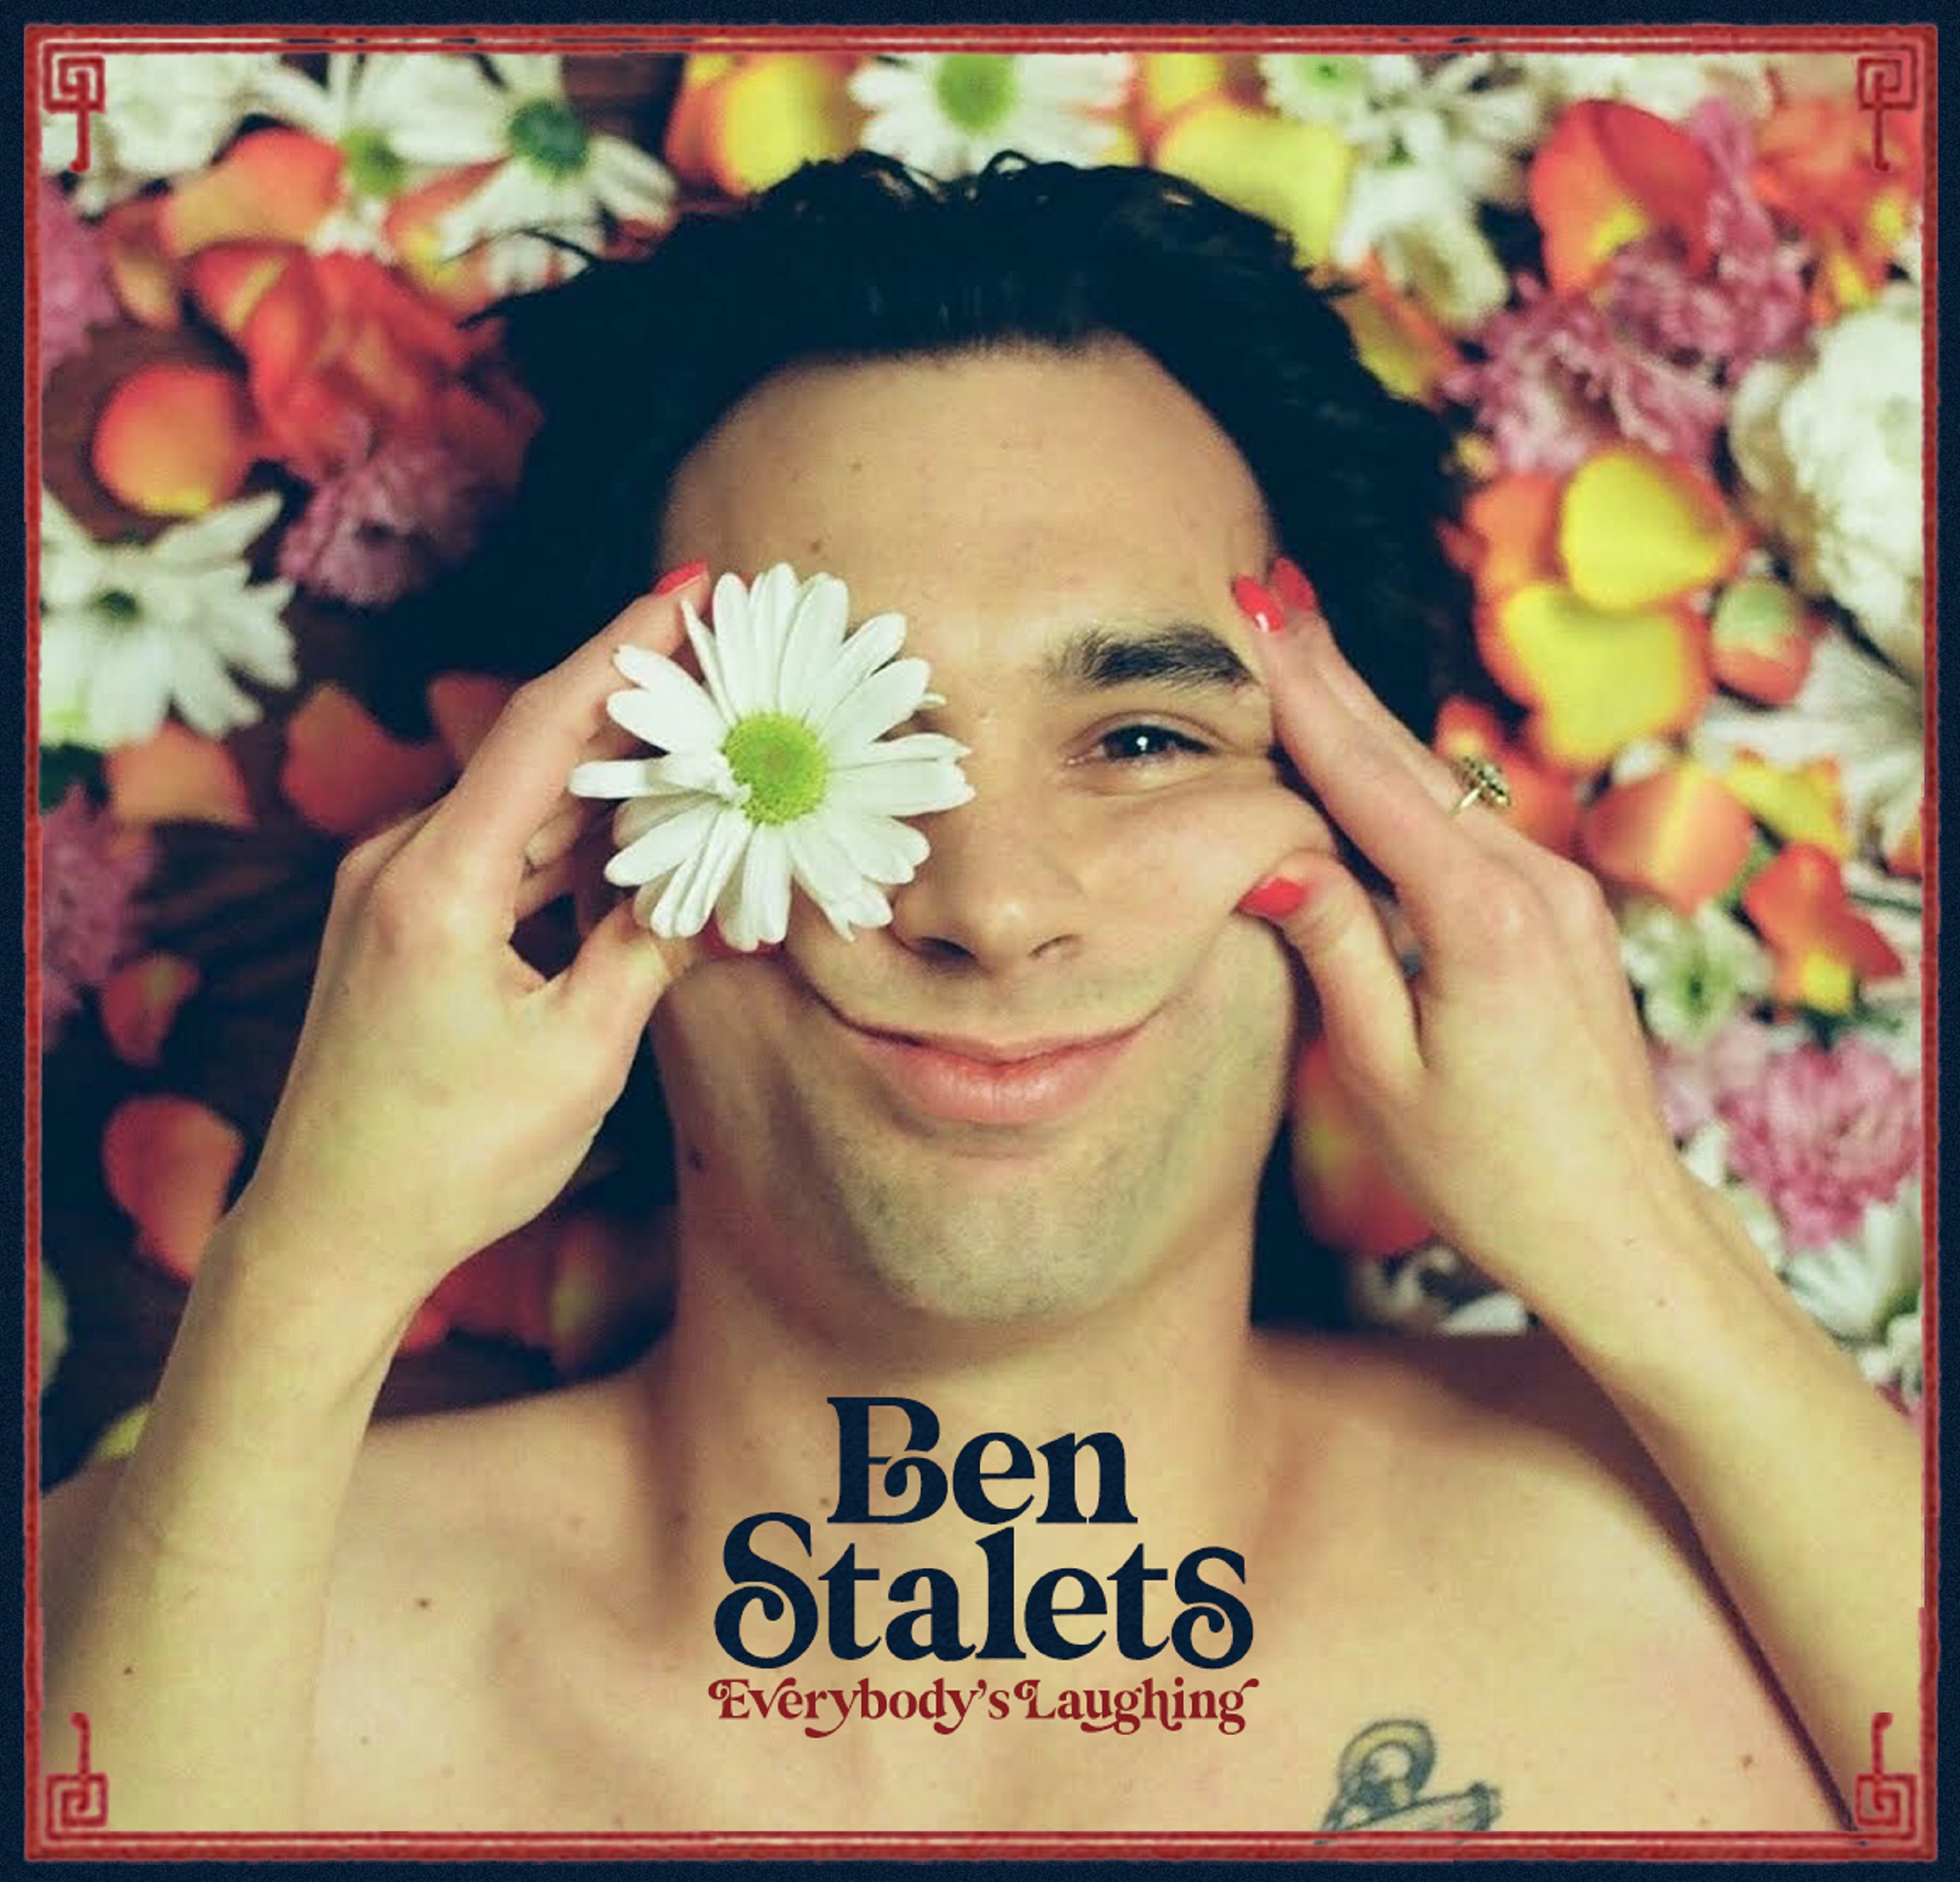 Ben Stalets Release New Album, Everybody’s Laughing